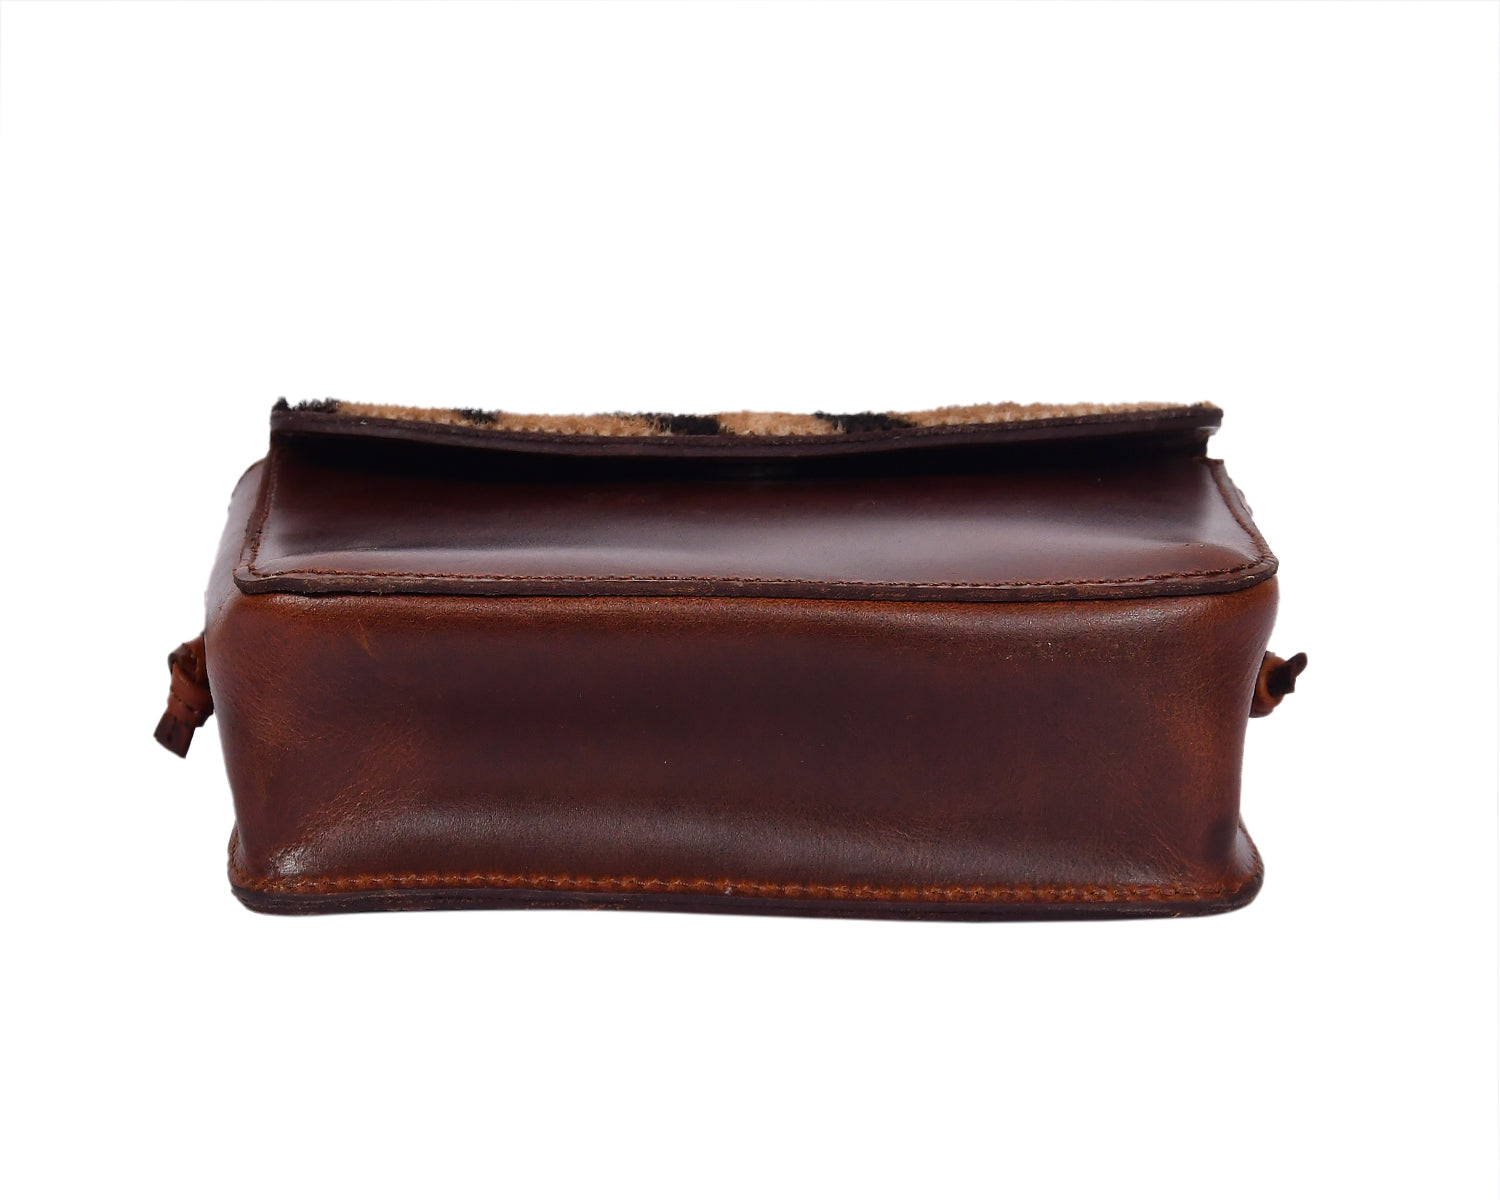 Elevate - Brown Leather Sling Bag with Hair-On Leather - CELTICINDIA